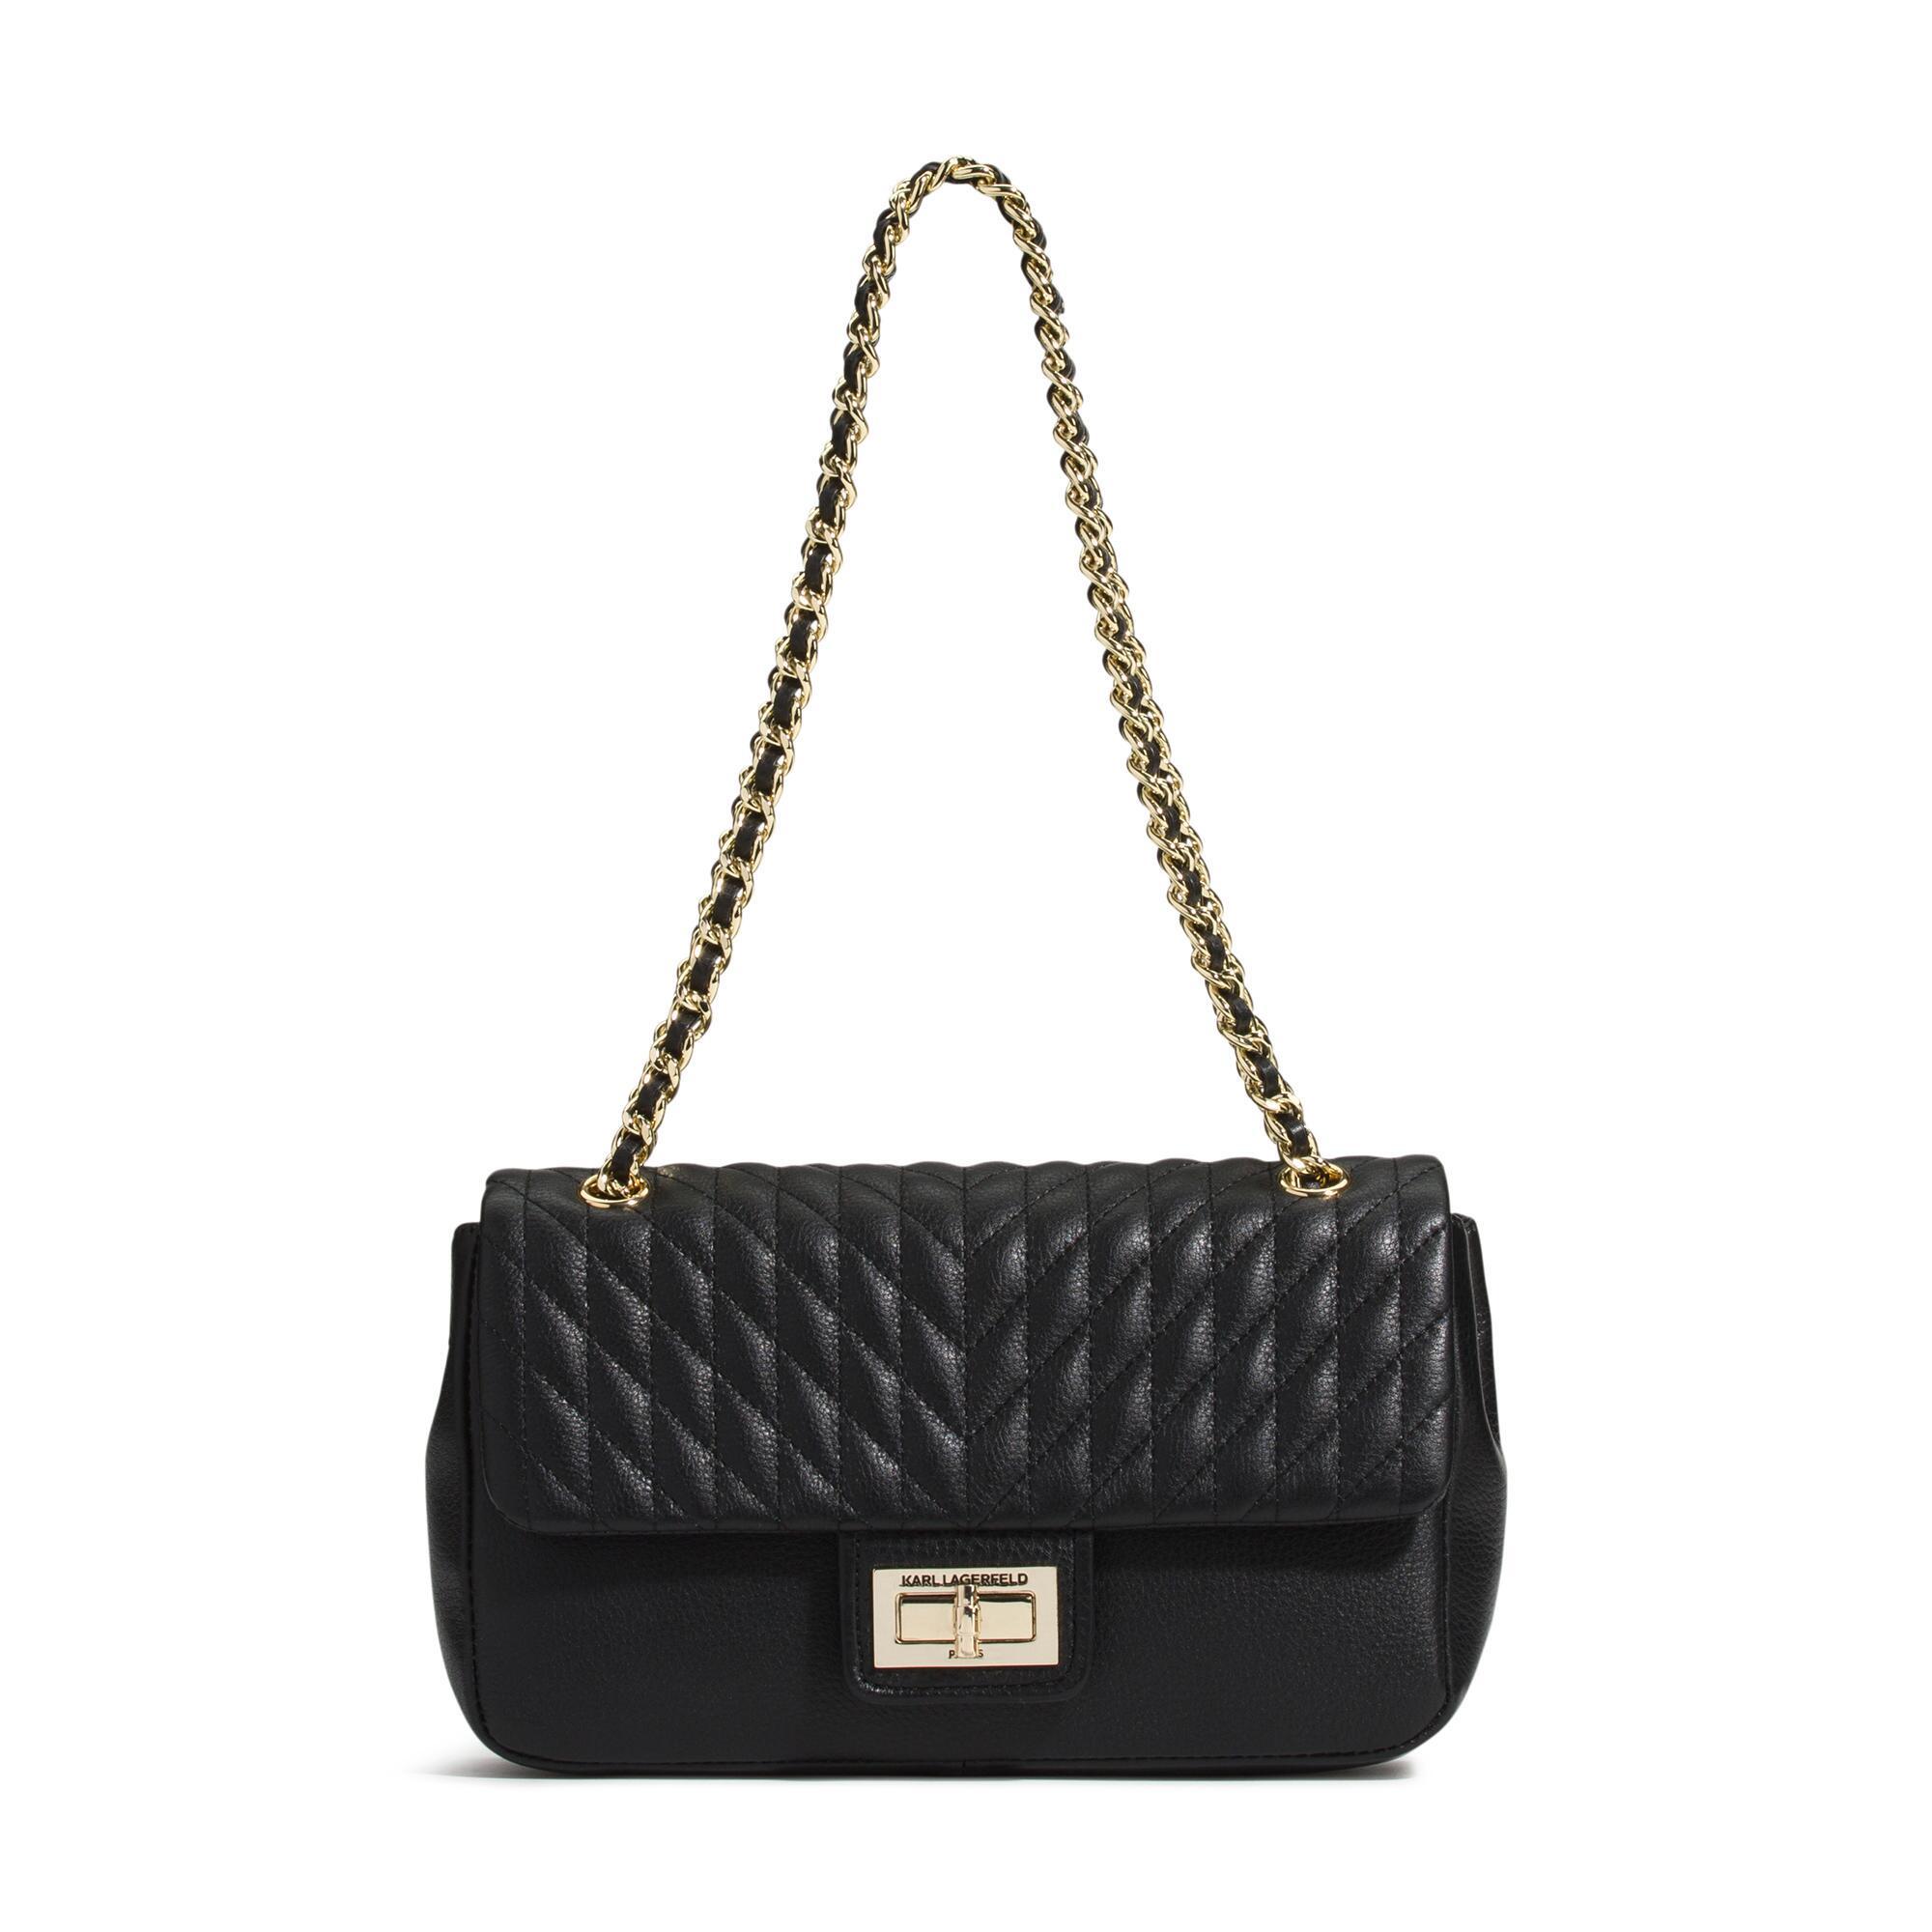 Karl Lagerfeld Leather Agyness Lamb Convertible Demi Bag in Black - Lyst